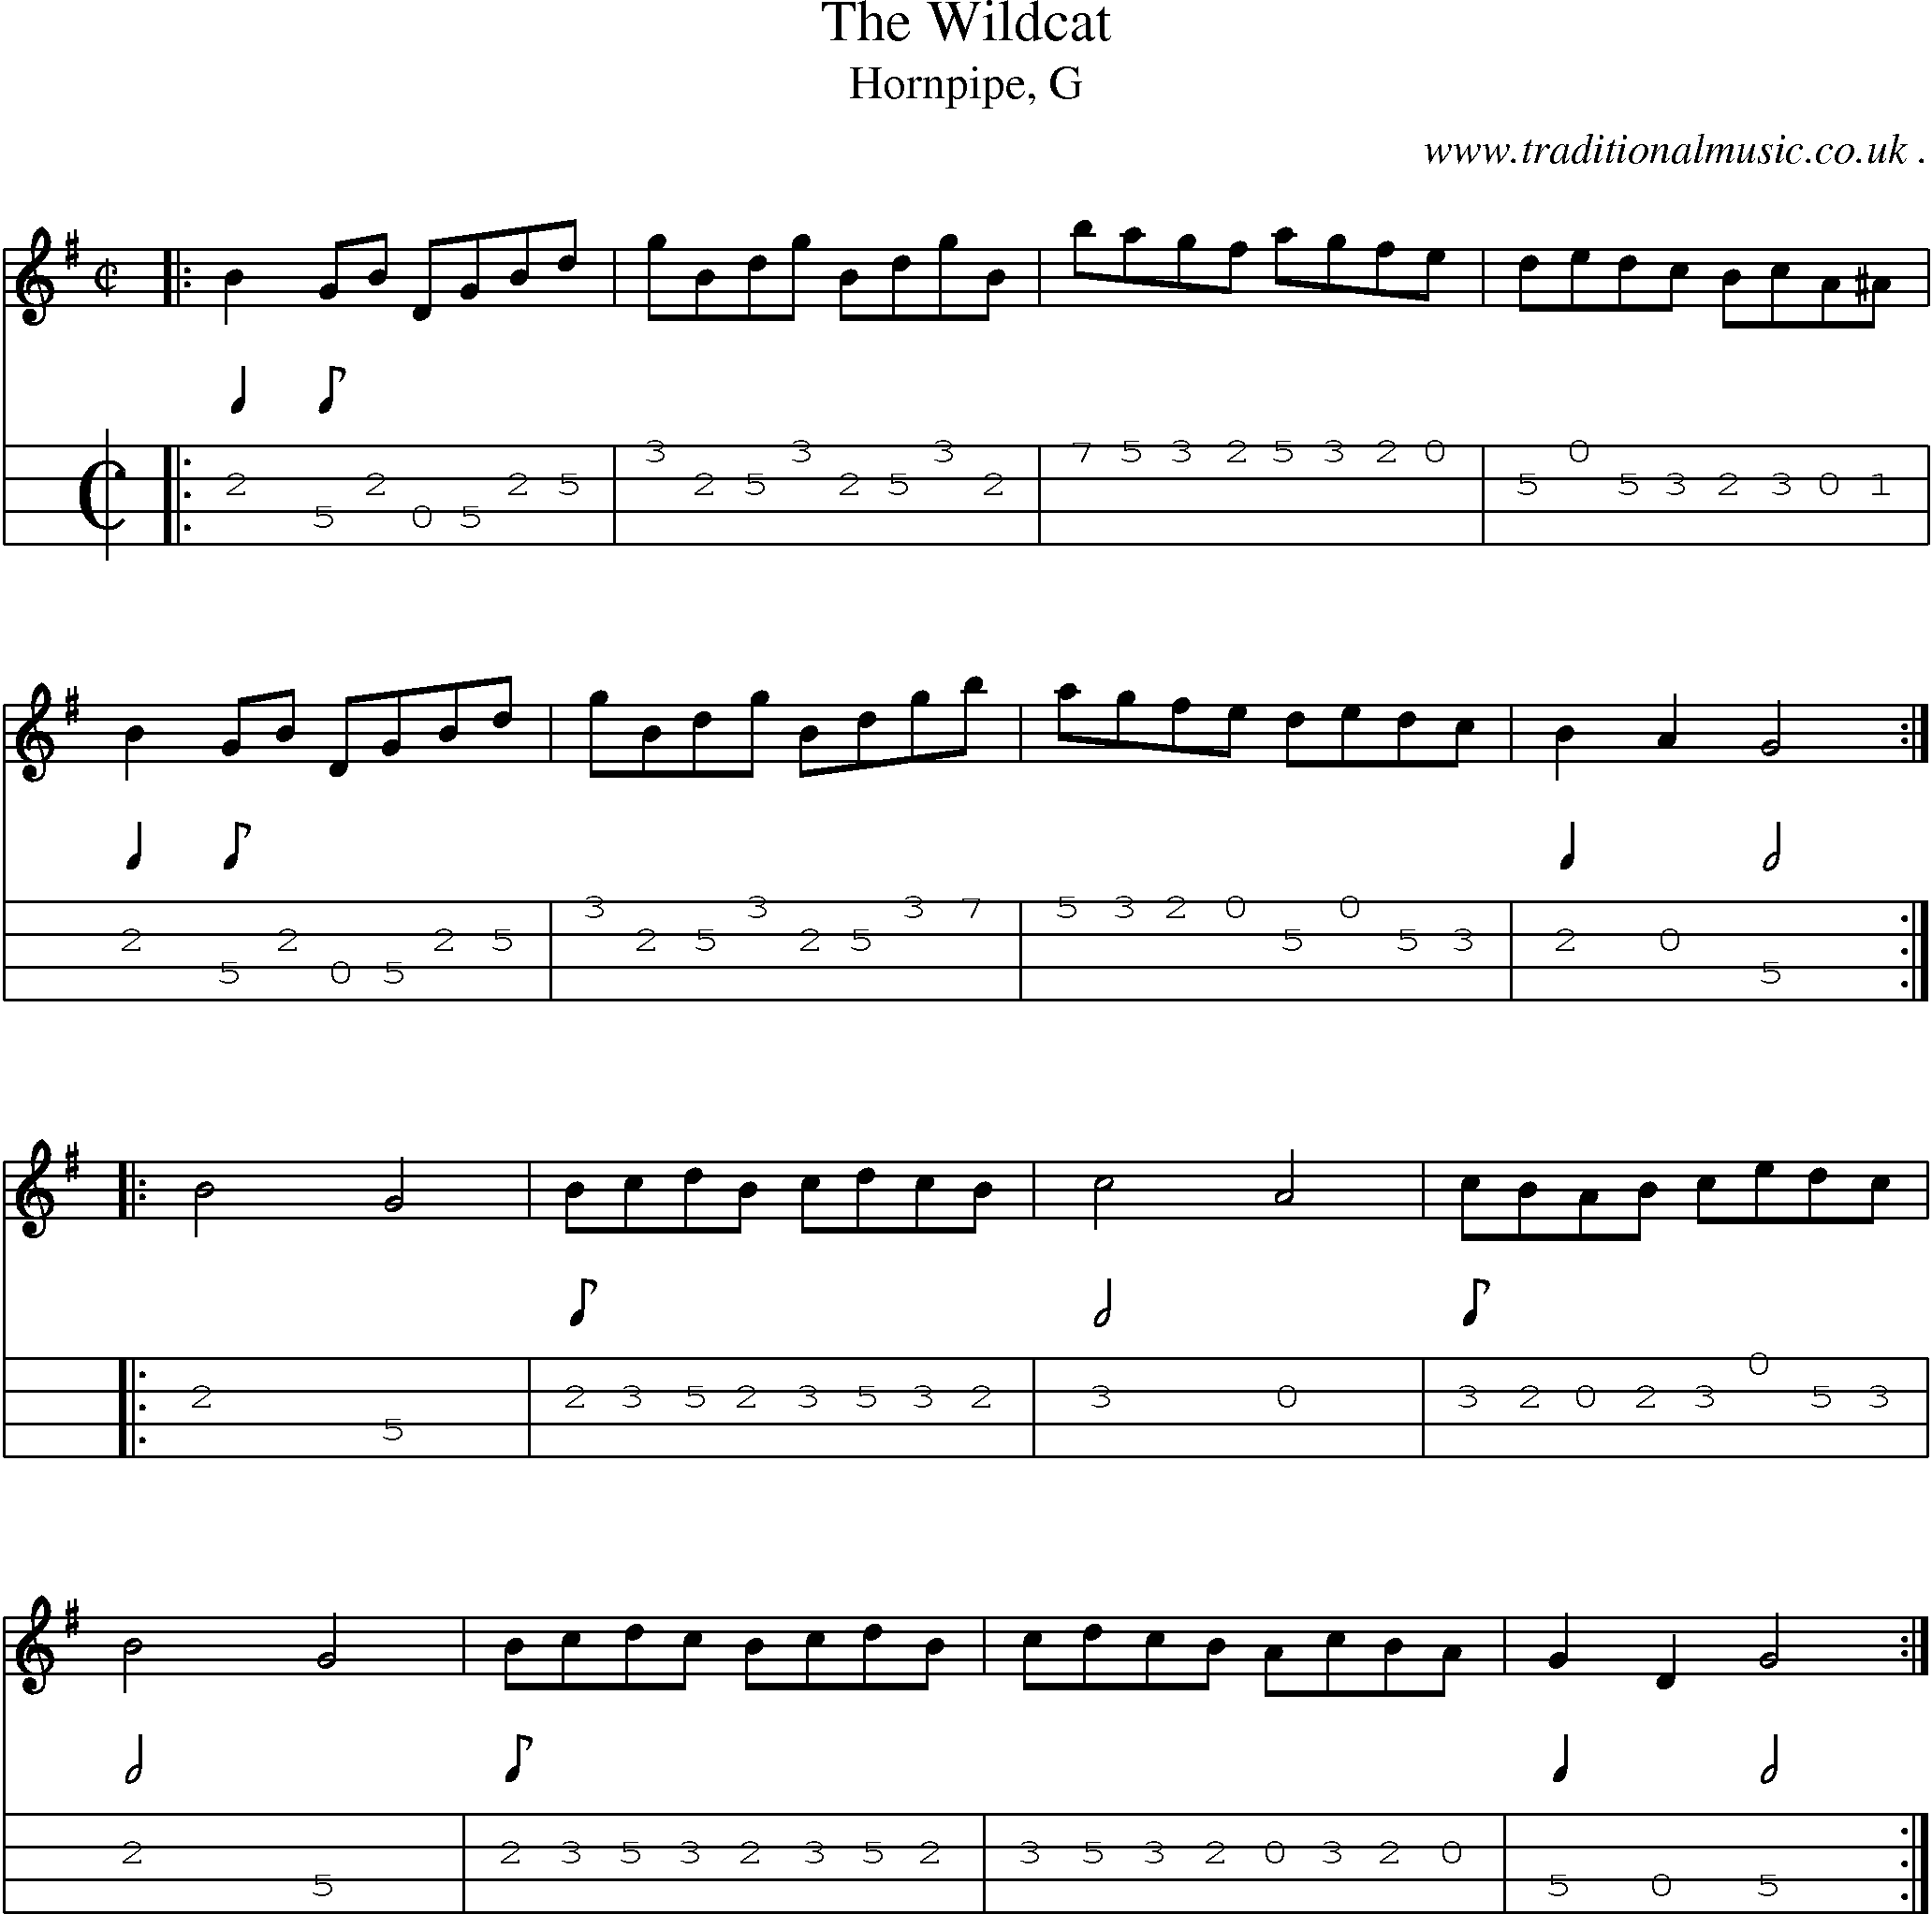 Sheet-music  score, Chords and Mandolin Tabs for The Wildcat